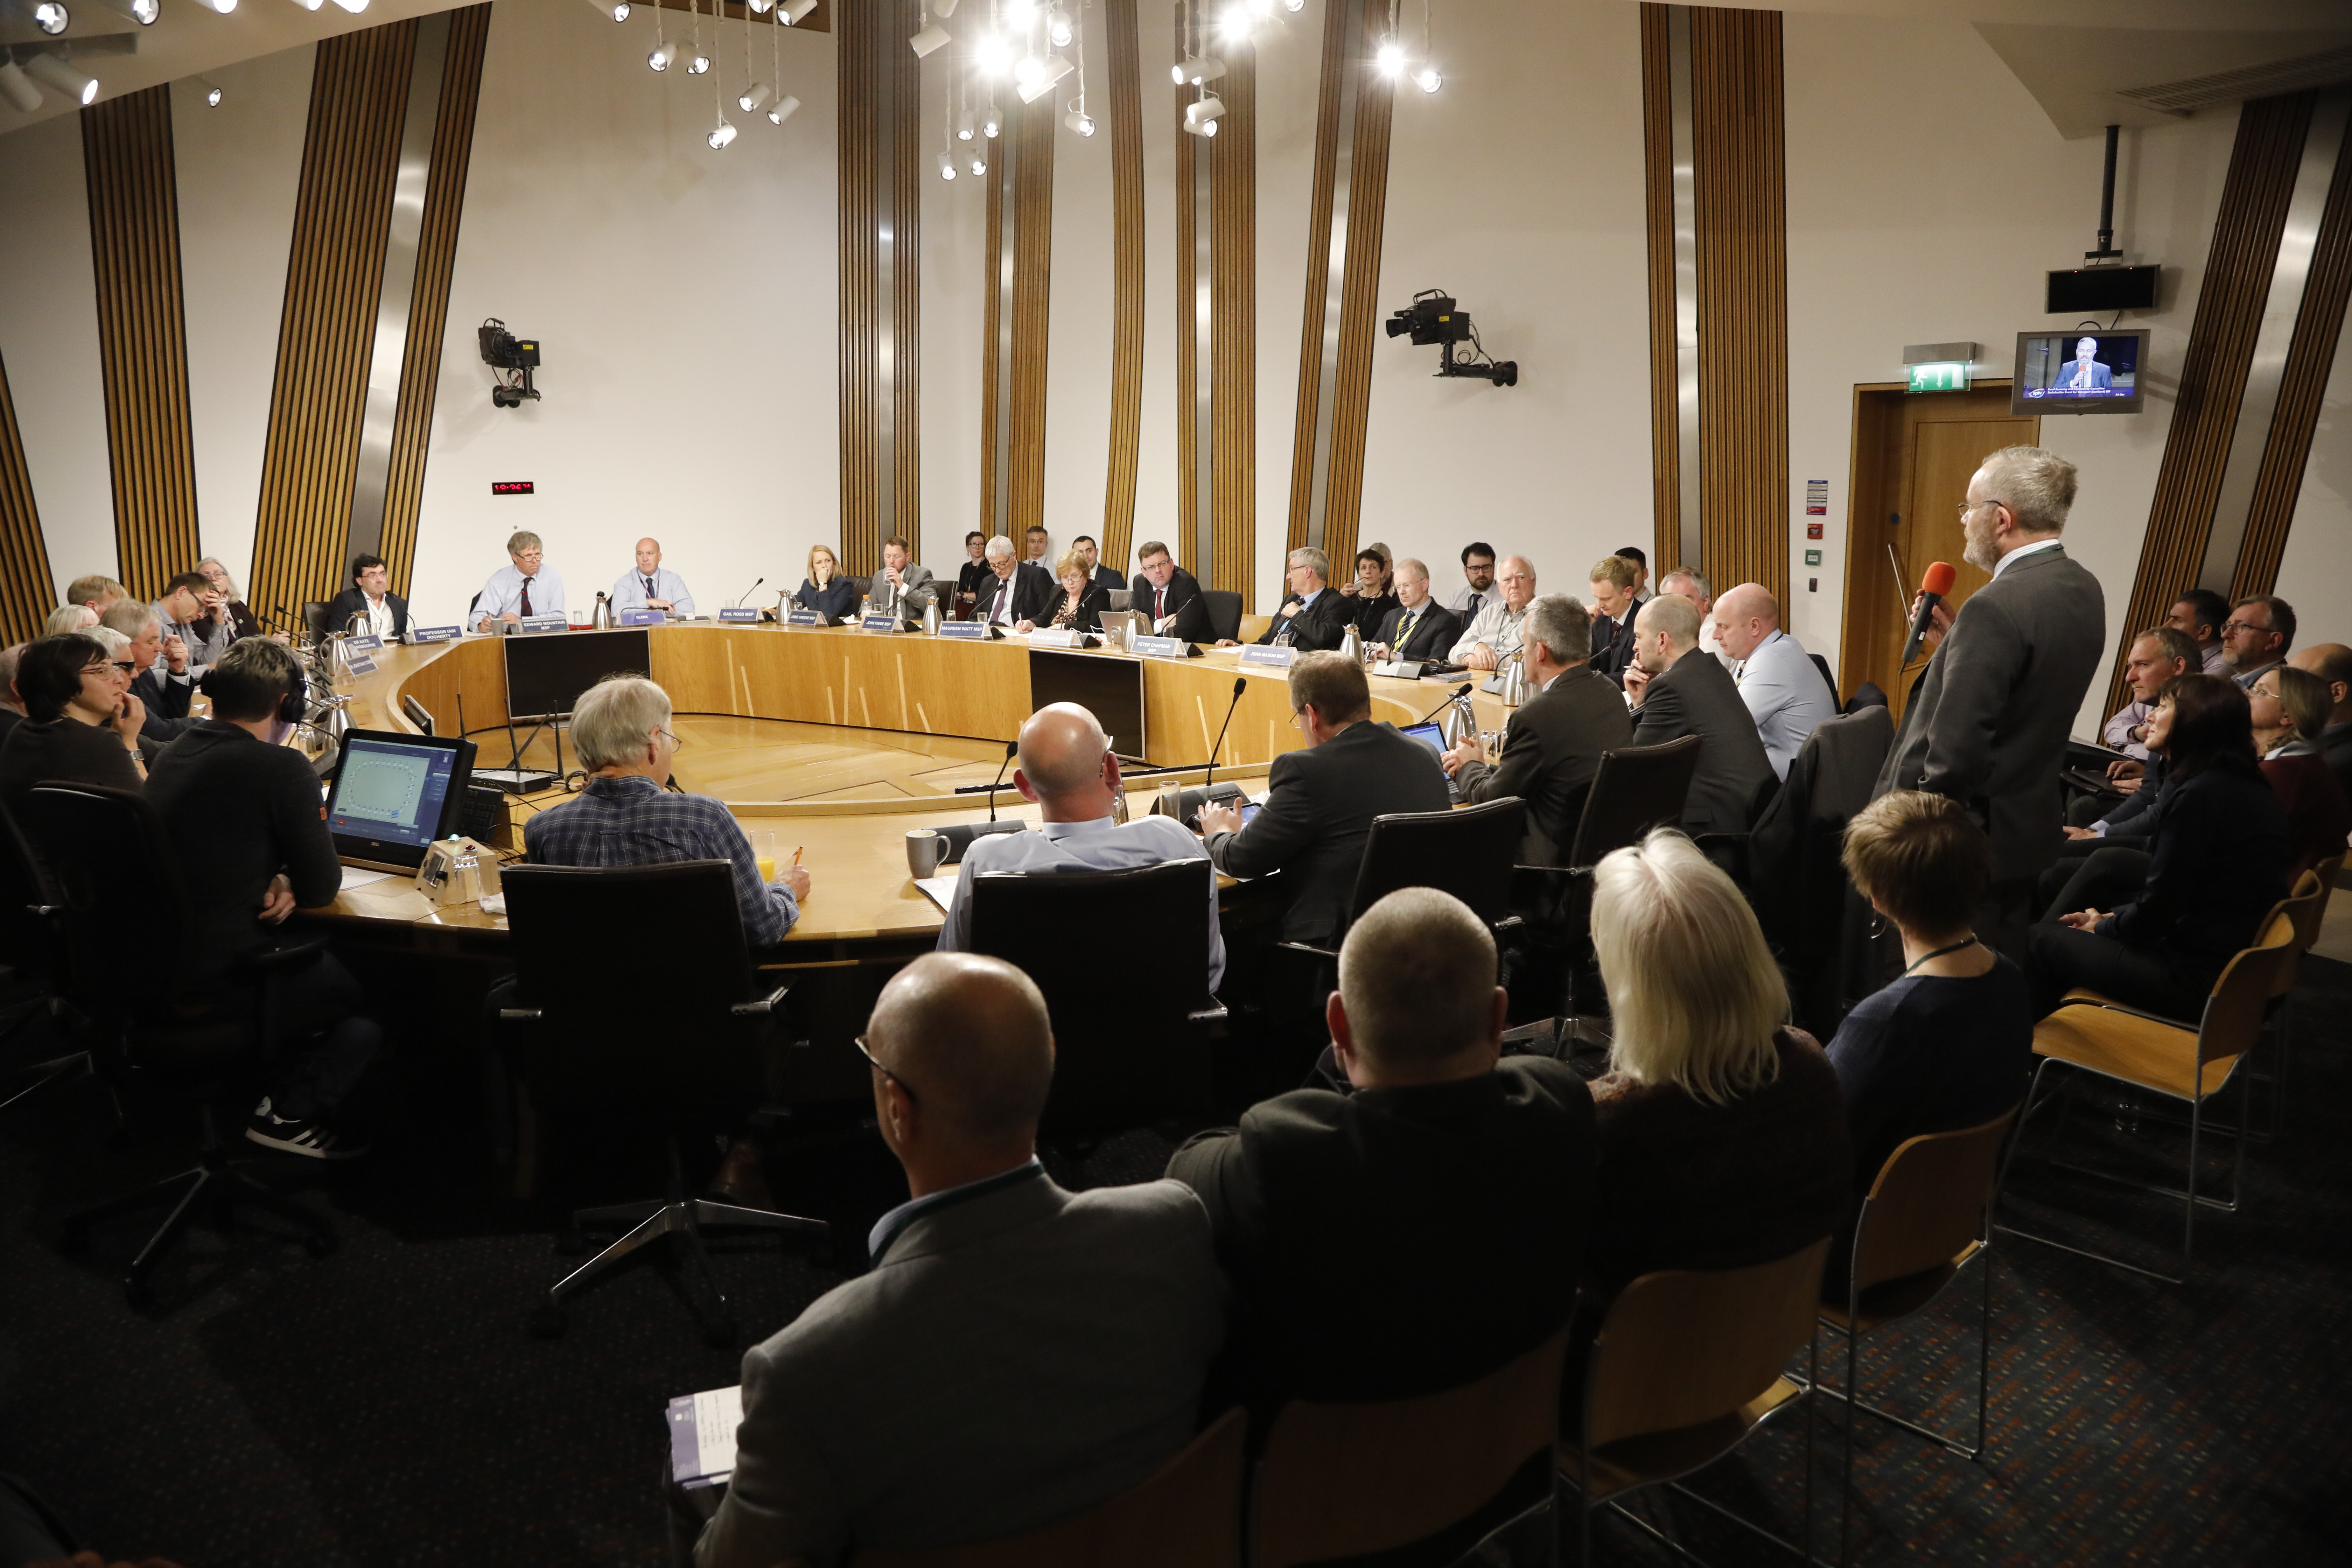 Informal stakeholder event in the Scottish Parliament on 24 October